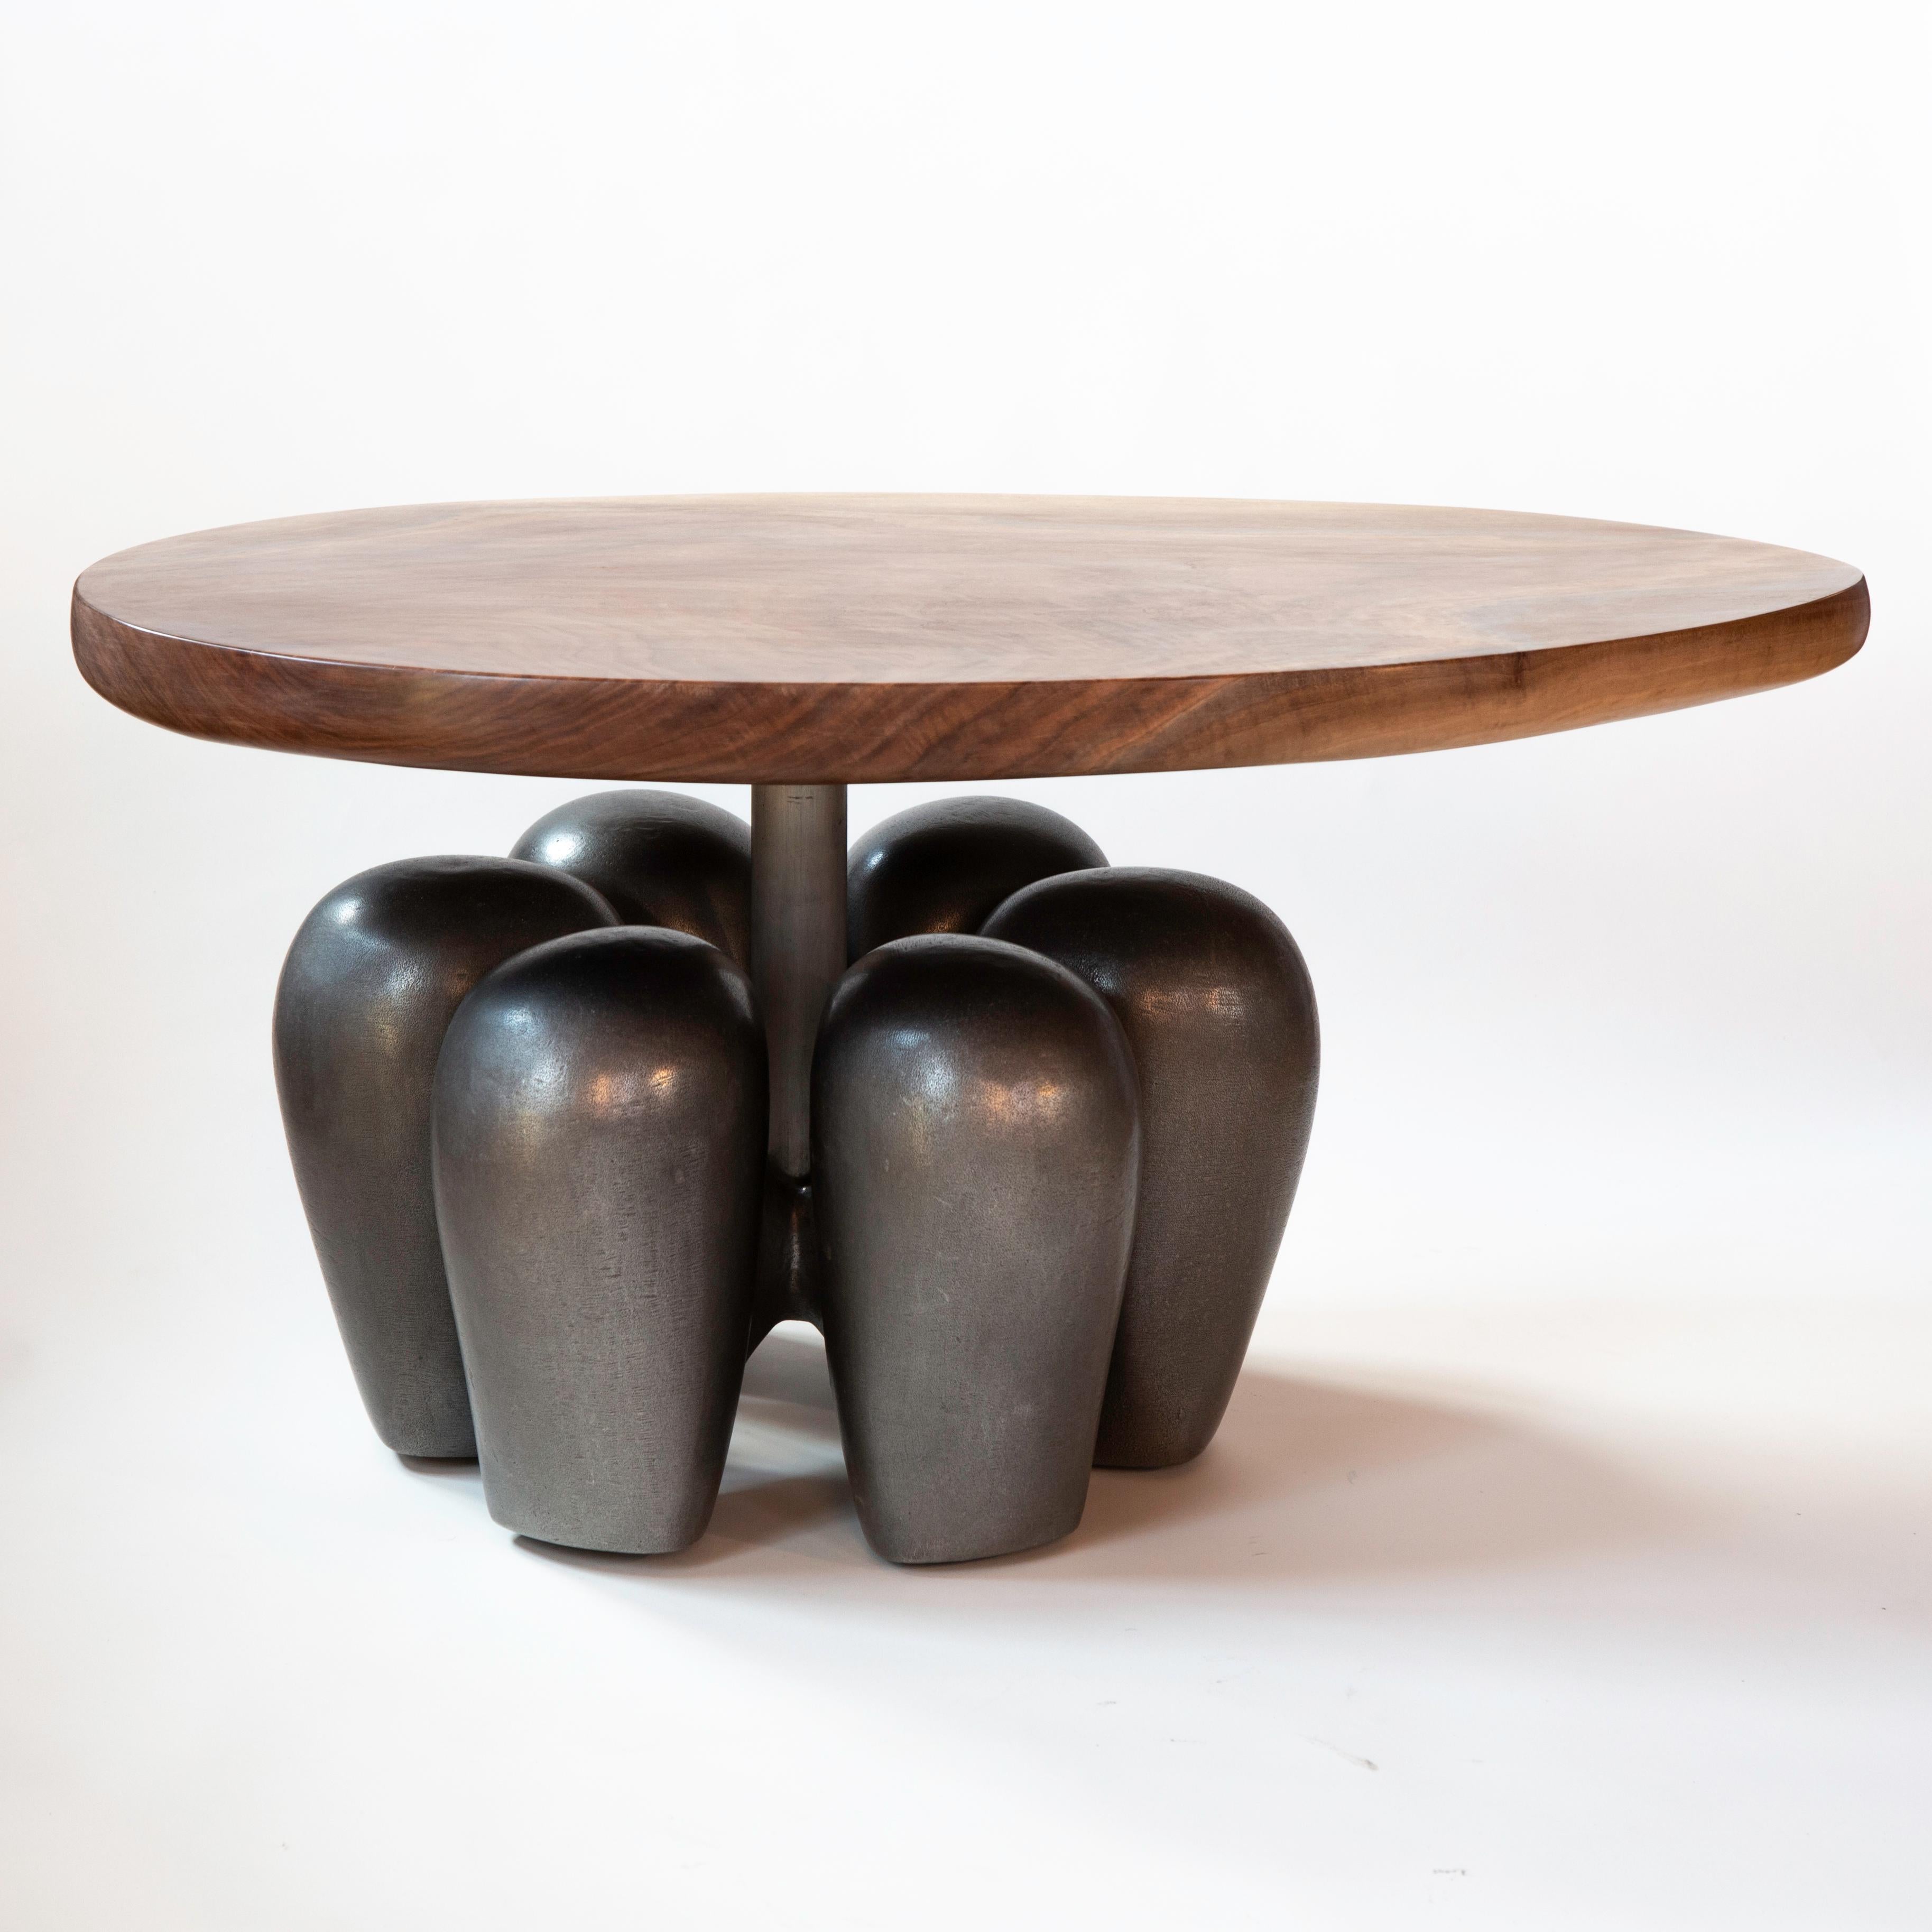 Truffula Table, Hand Carved Walnut, Cast Aluminum, Patina, Jordan Mozer USA 2019 In New Condition For Sale In Chicago, IL